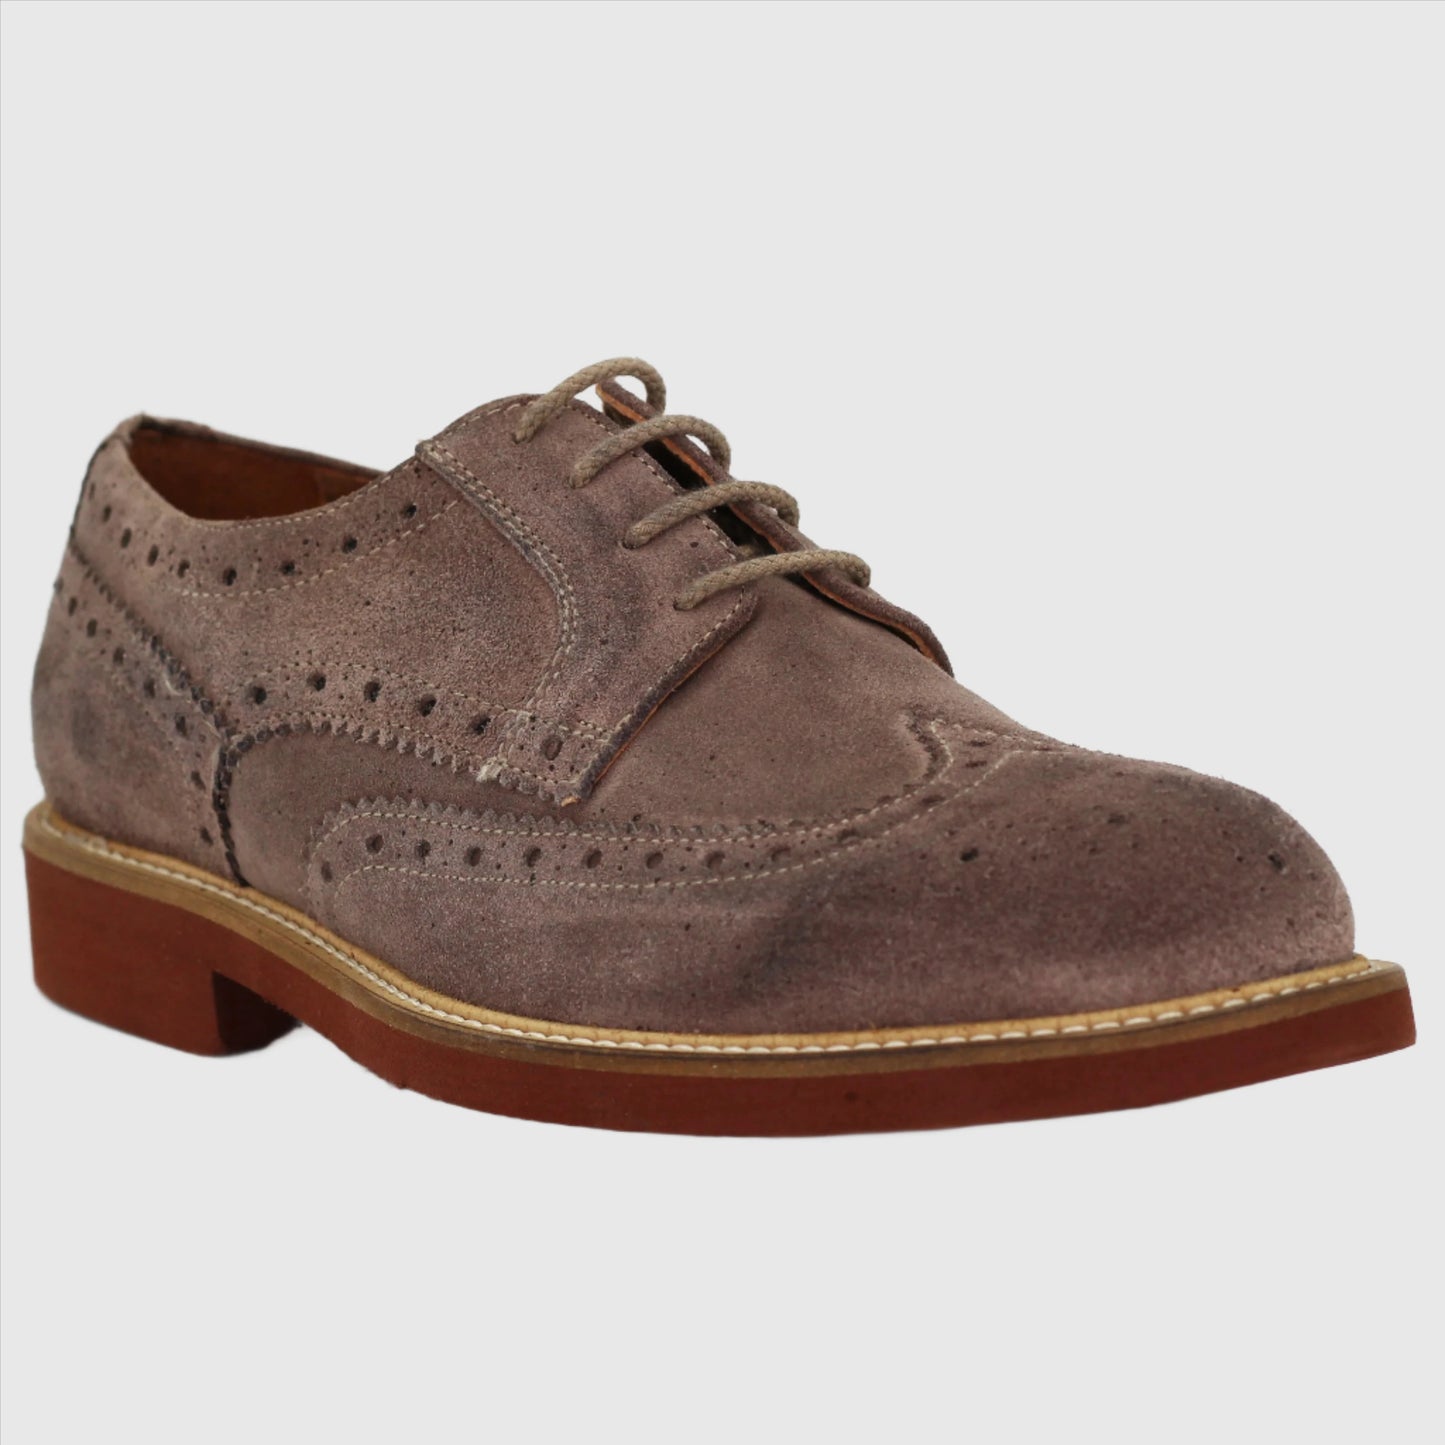 Shop Handmade Italian Leather Derby Brogue in Taupe (GRD1007D) or browse our range of hand-made Italian shoes in leather or suede in-store at Aliverti Cape Town, or shop online. We deliver in South Africa & offer multiple payment plans as well as accept multiple safe & secure payment methods.